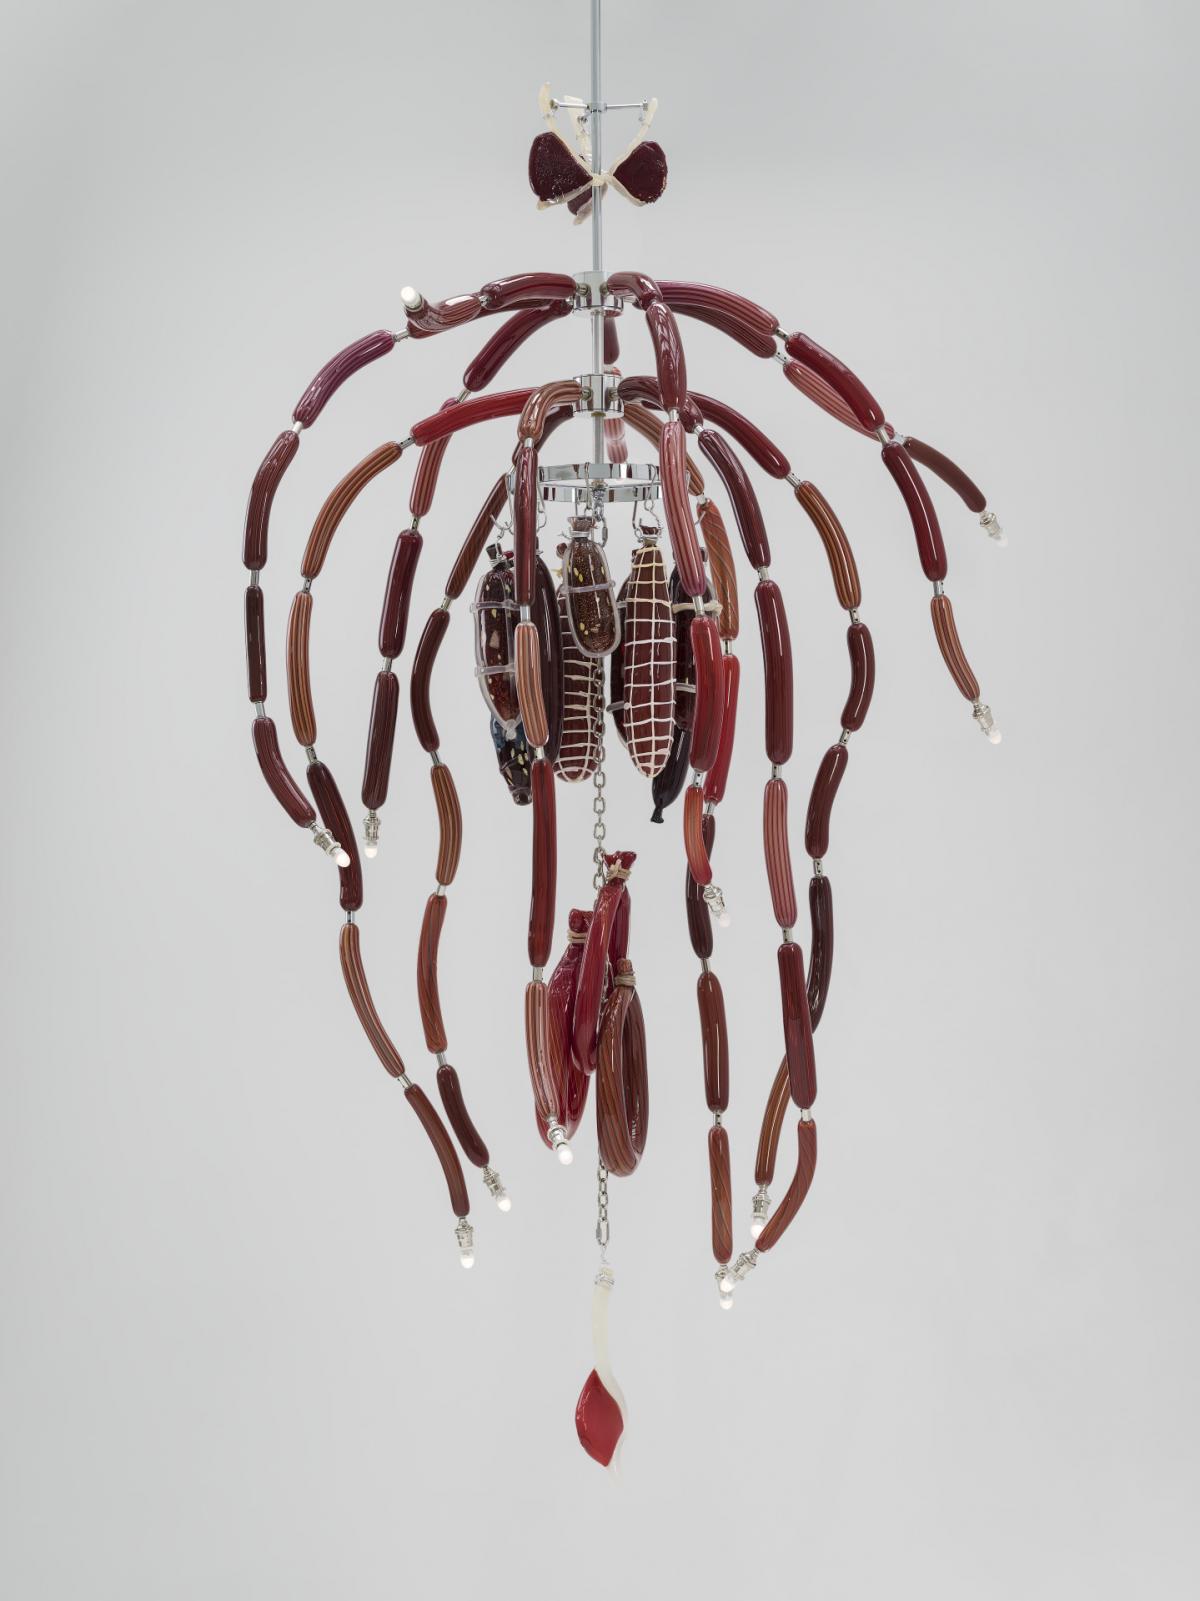 A chandelier made of glass that looks like meat.